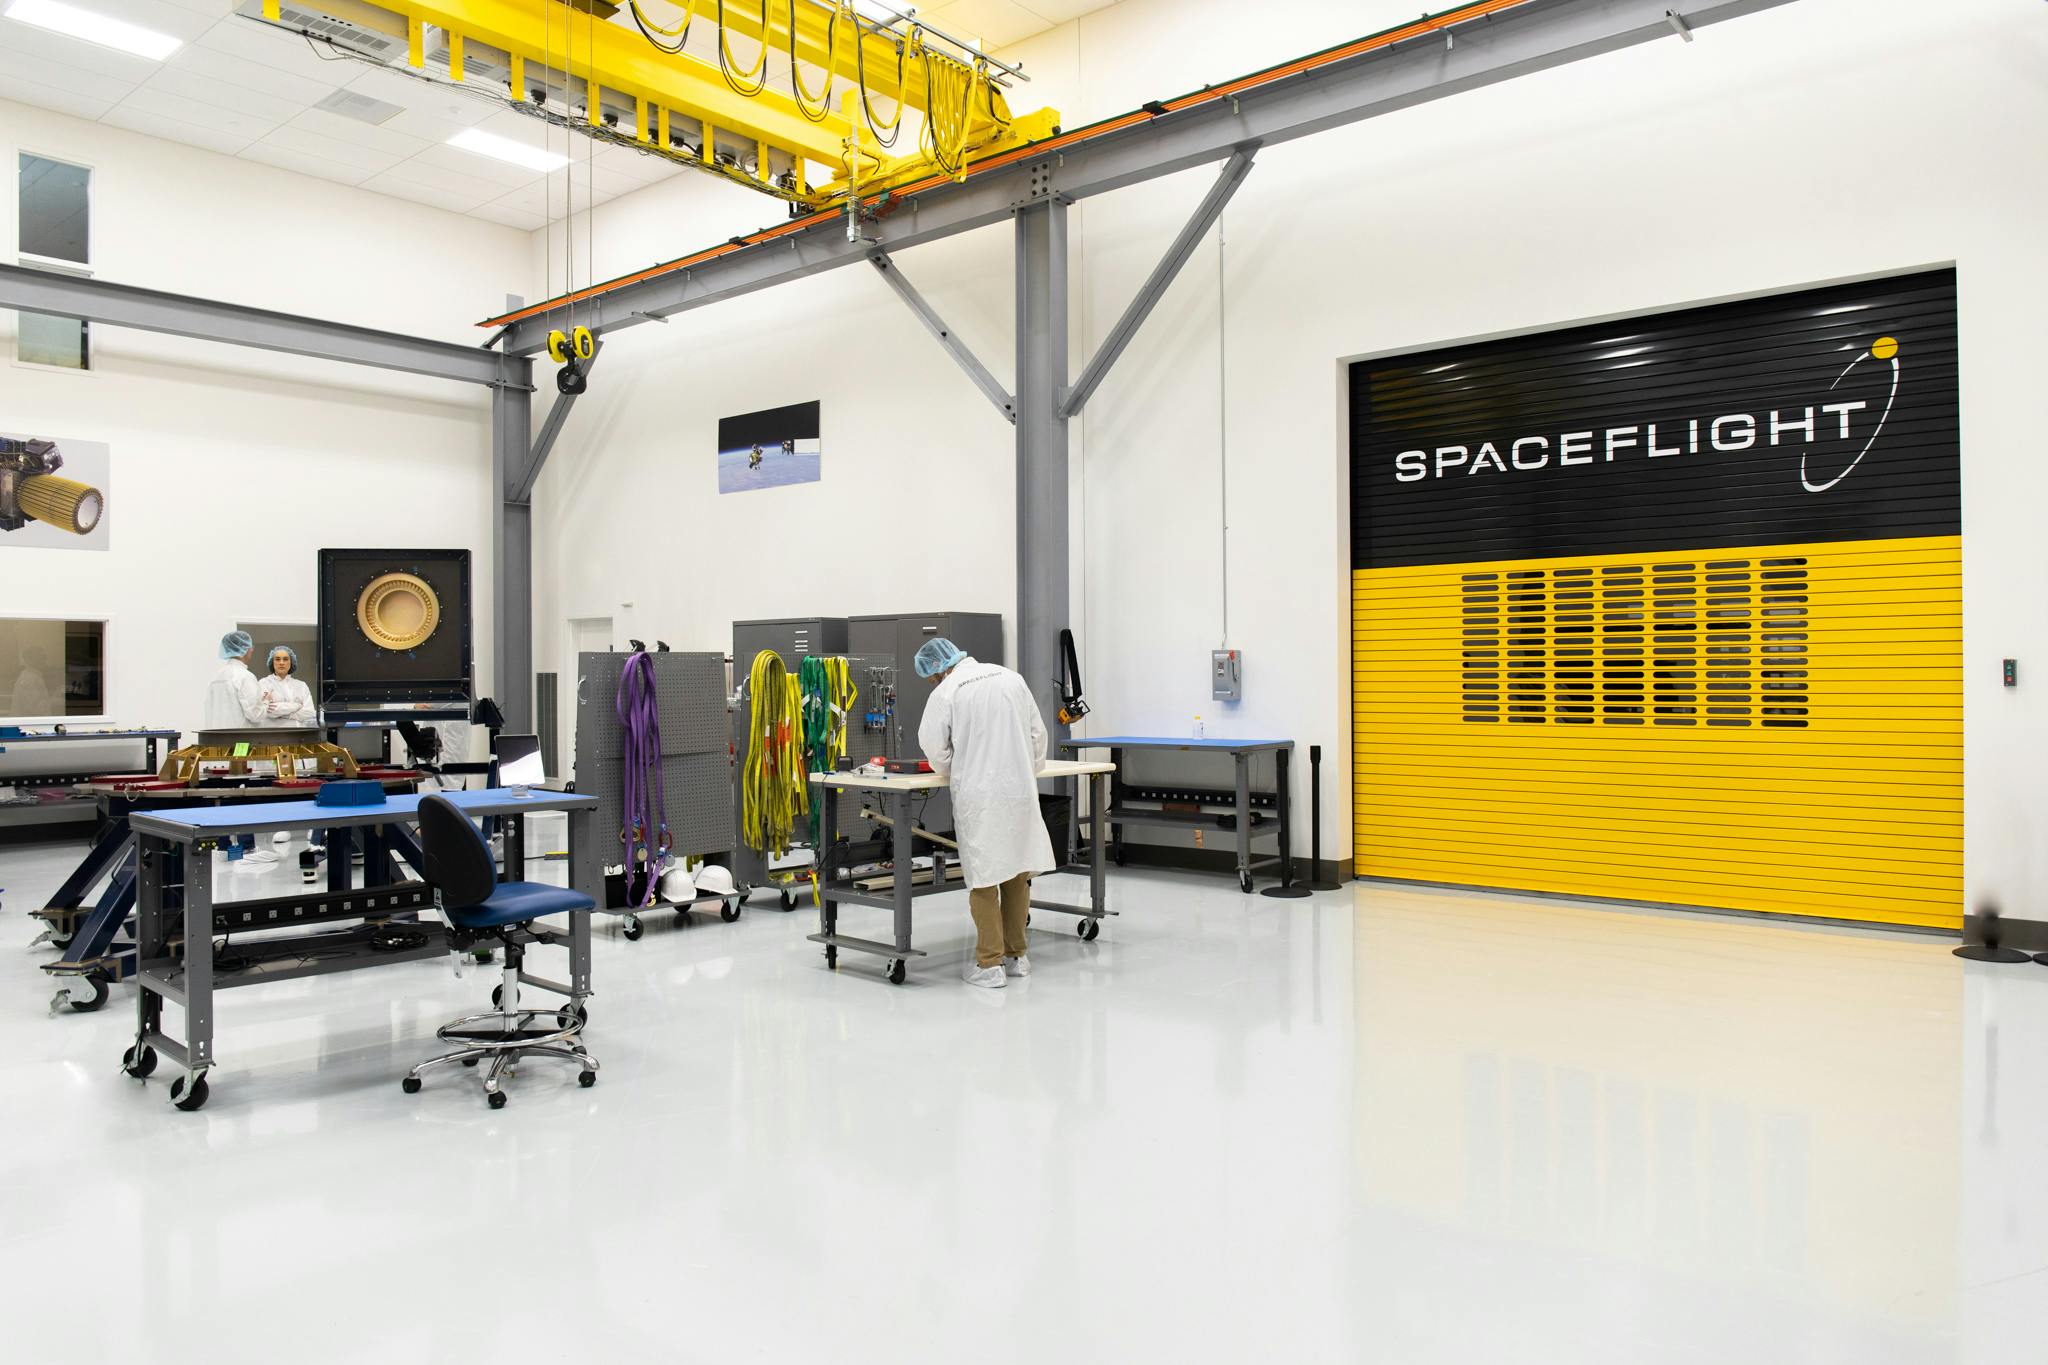 Inside the Spaceflight cleanroom. Large beams for the crane can be seen as well as a black and yellow garage door that has the Spaceflight logo on it. 